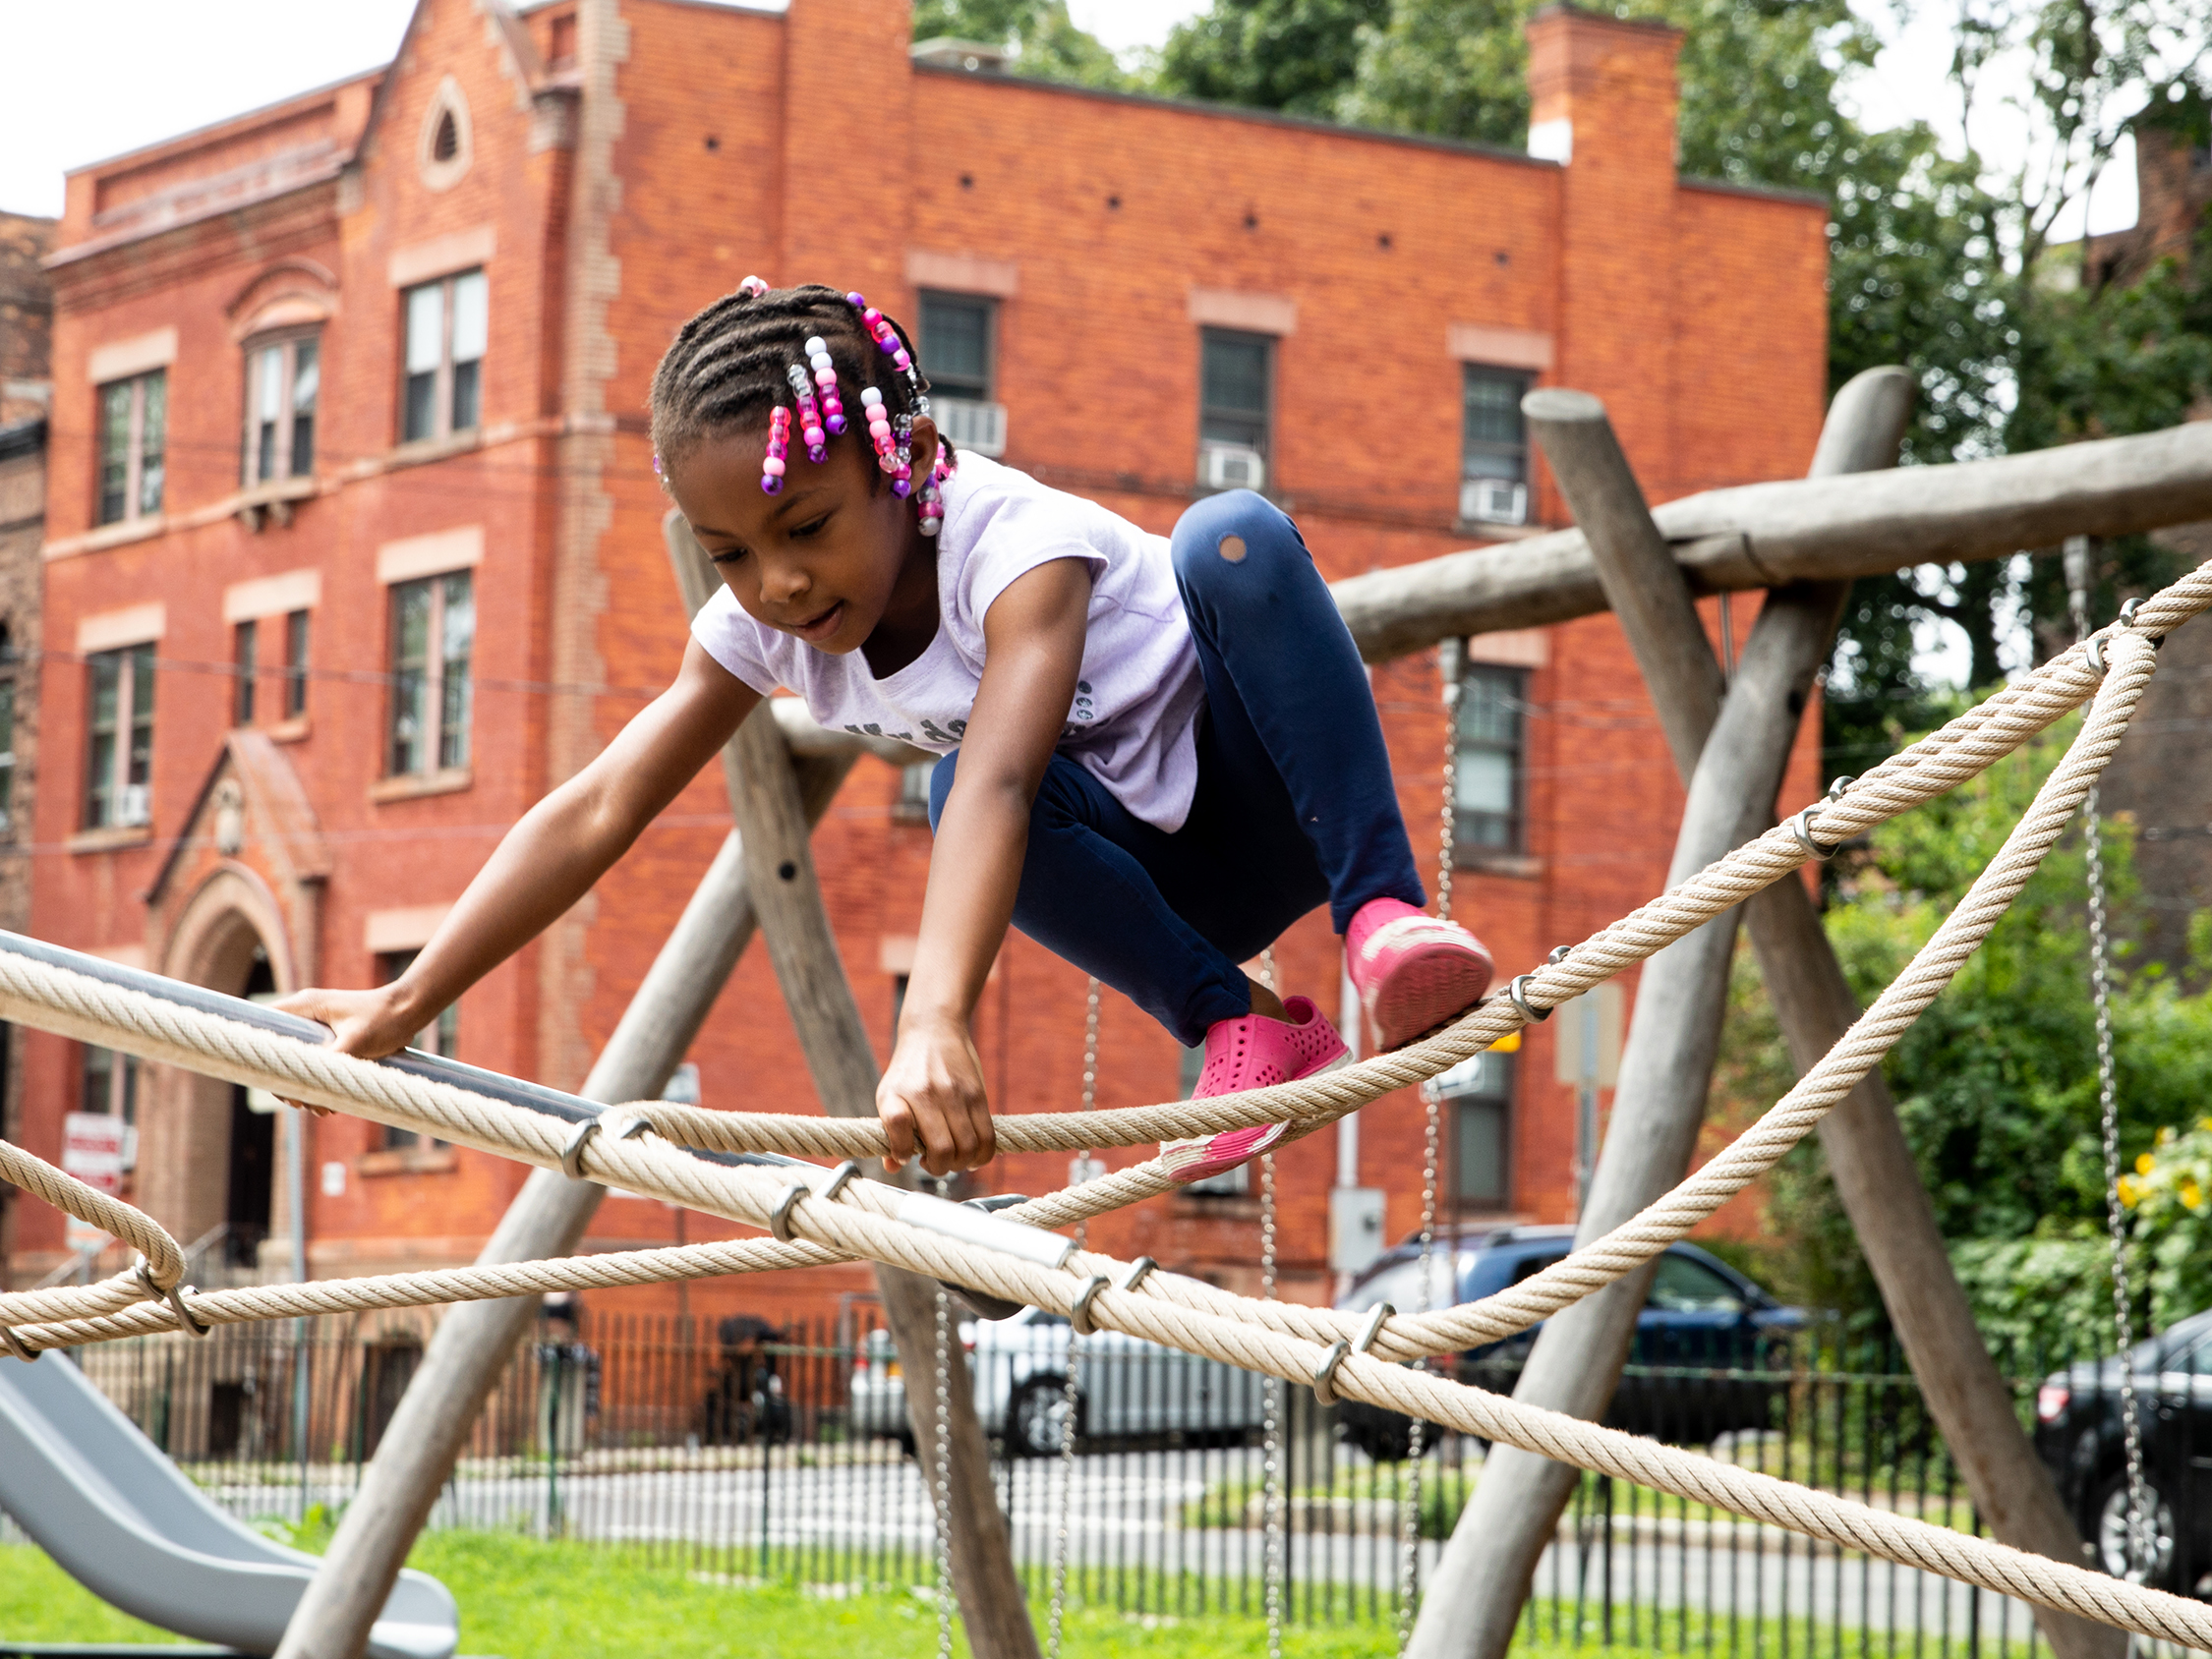 Race, Geographic Disparities in Childhood Wellness Opportunity